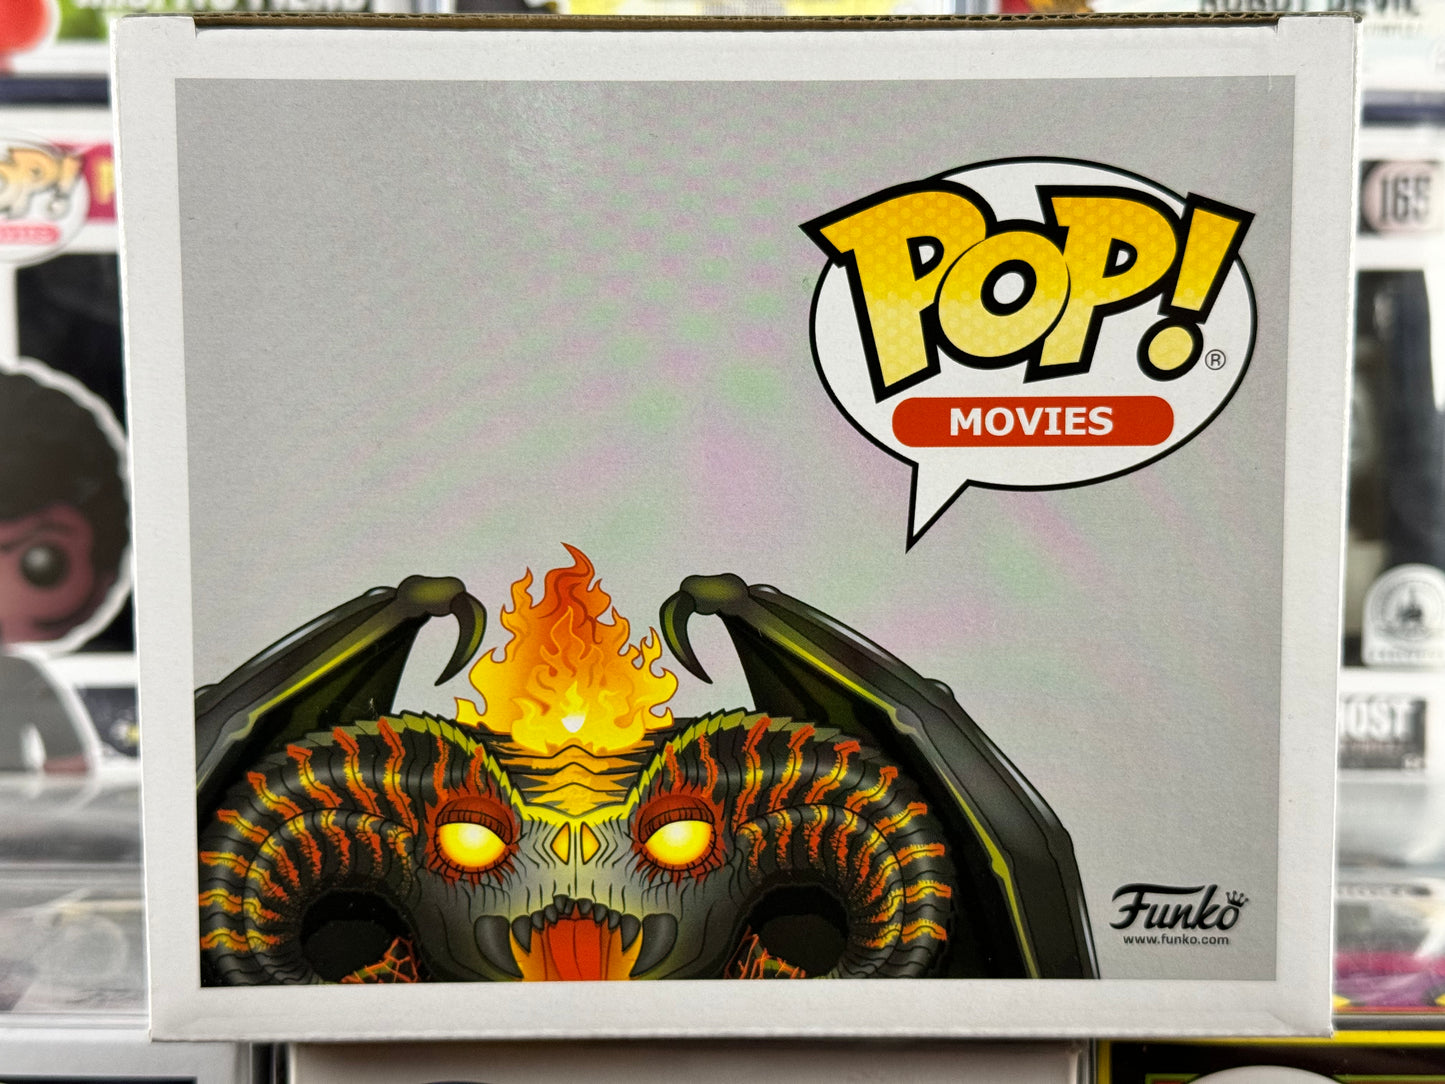 The Lord of the Rings - 6" - Balrog (Glow in the Dark) (448) Vaulted 2017 Fall Convention Exclusive